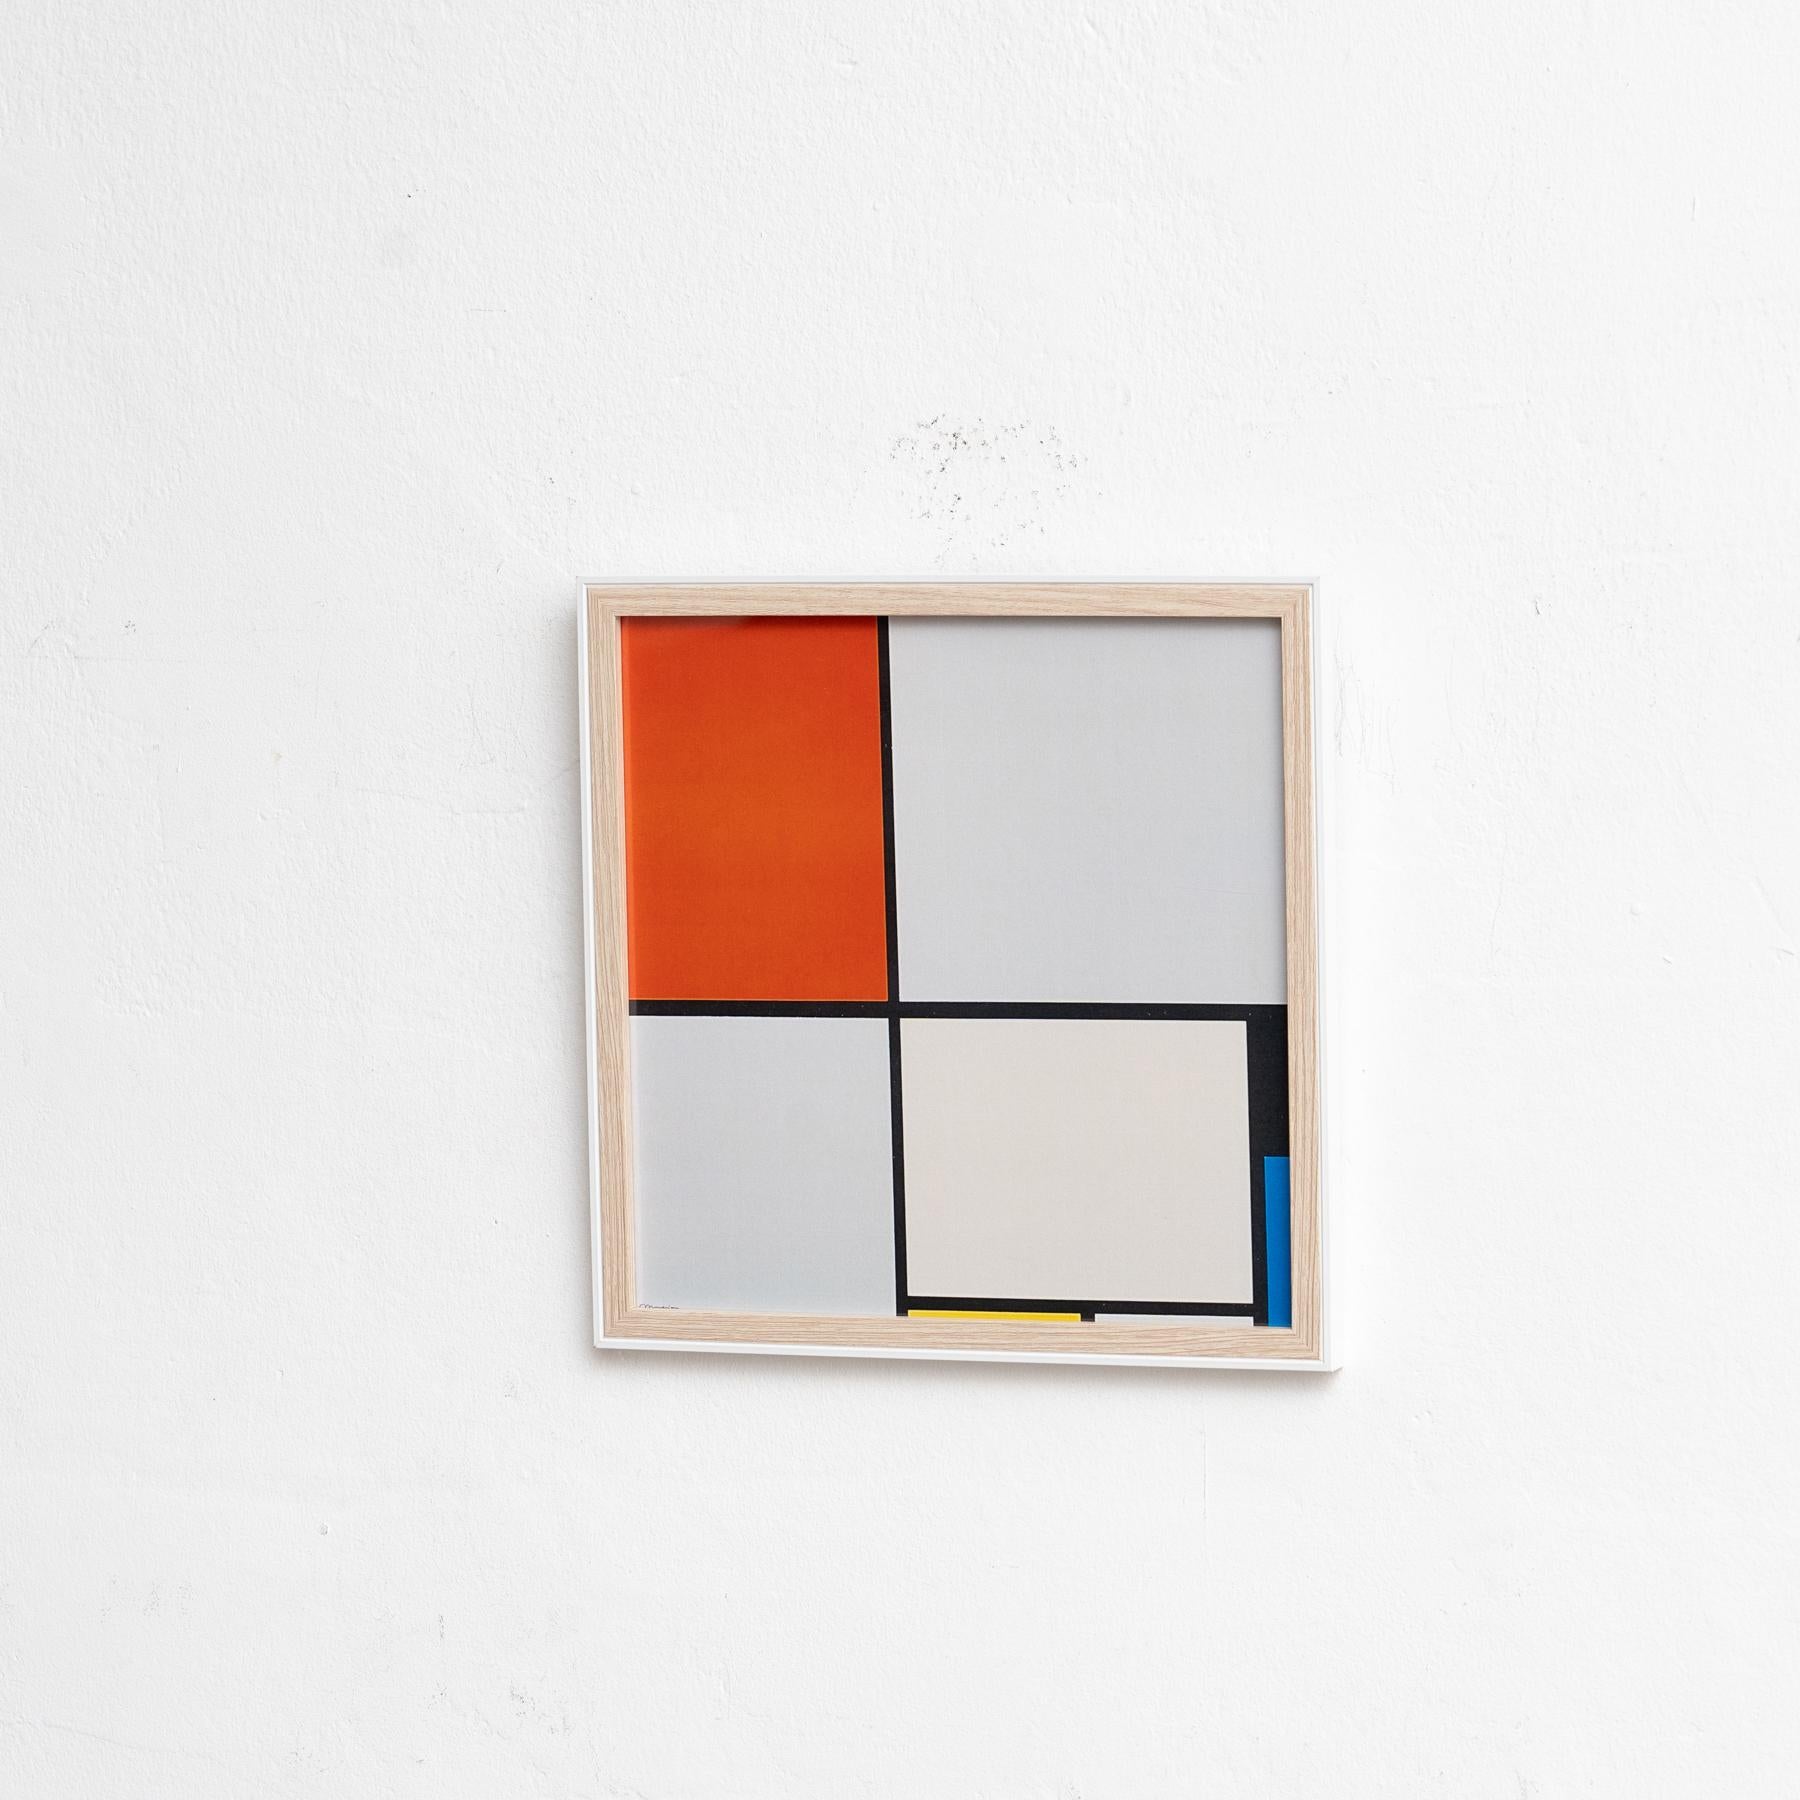 Mid-Century Modern Piet Mondrian Late 20th Centry Framed Print For Sale